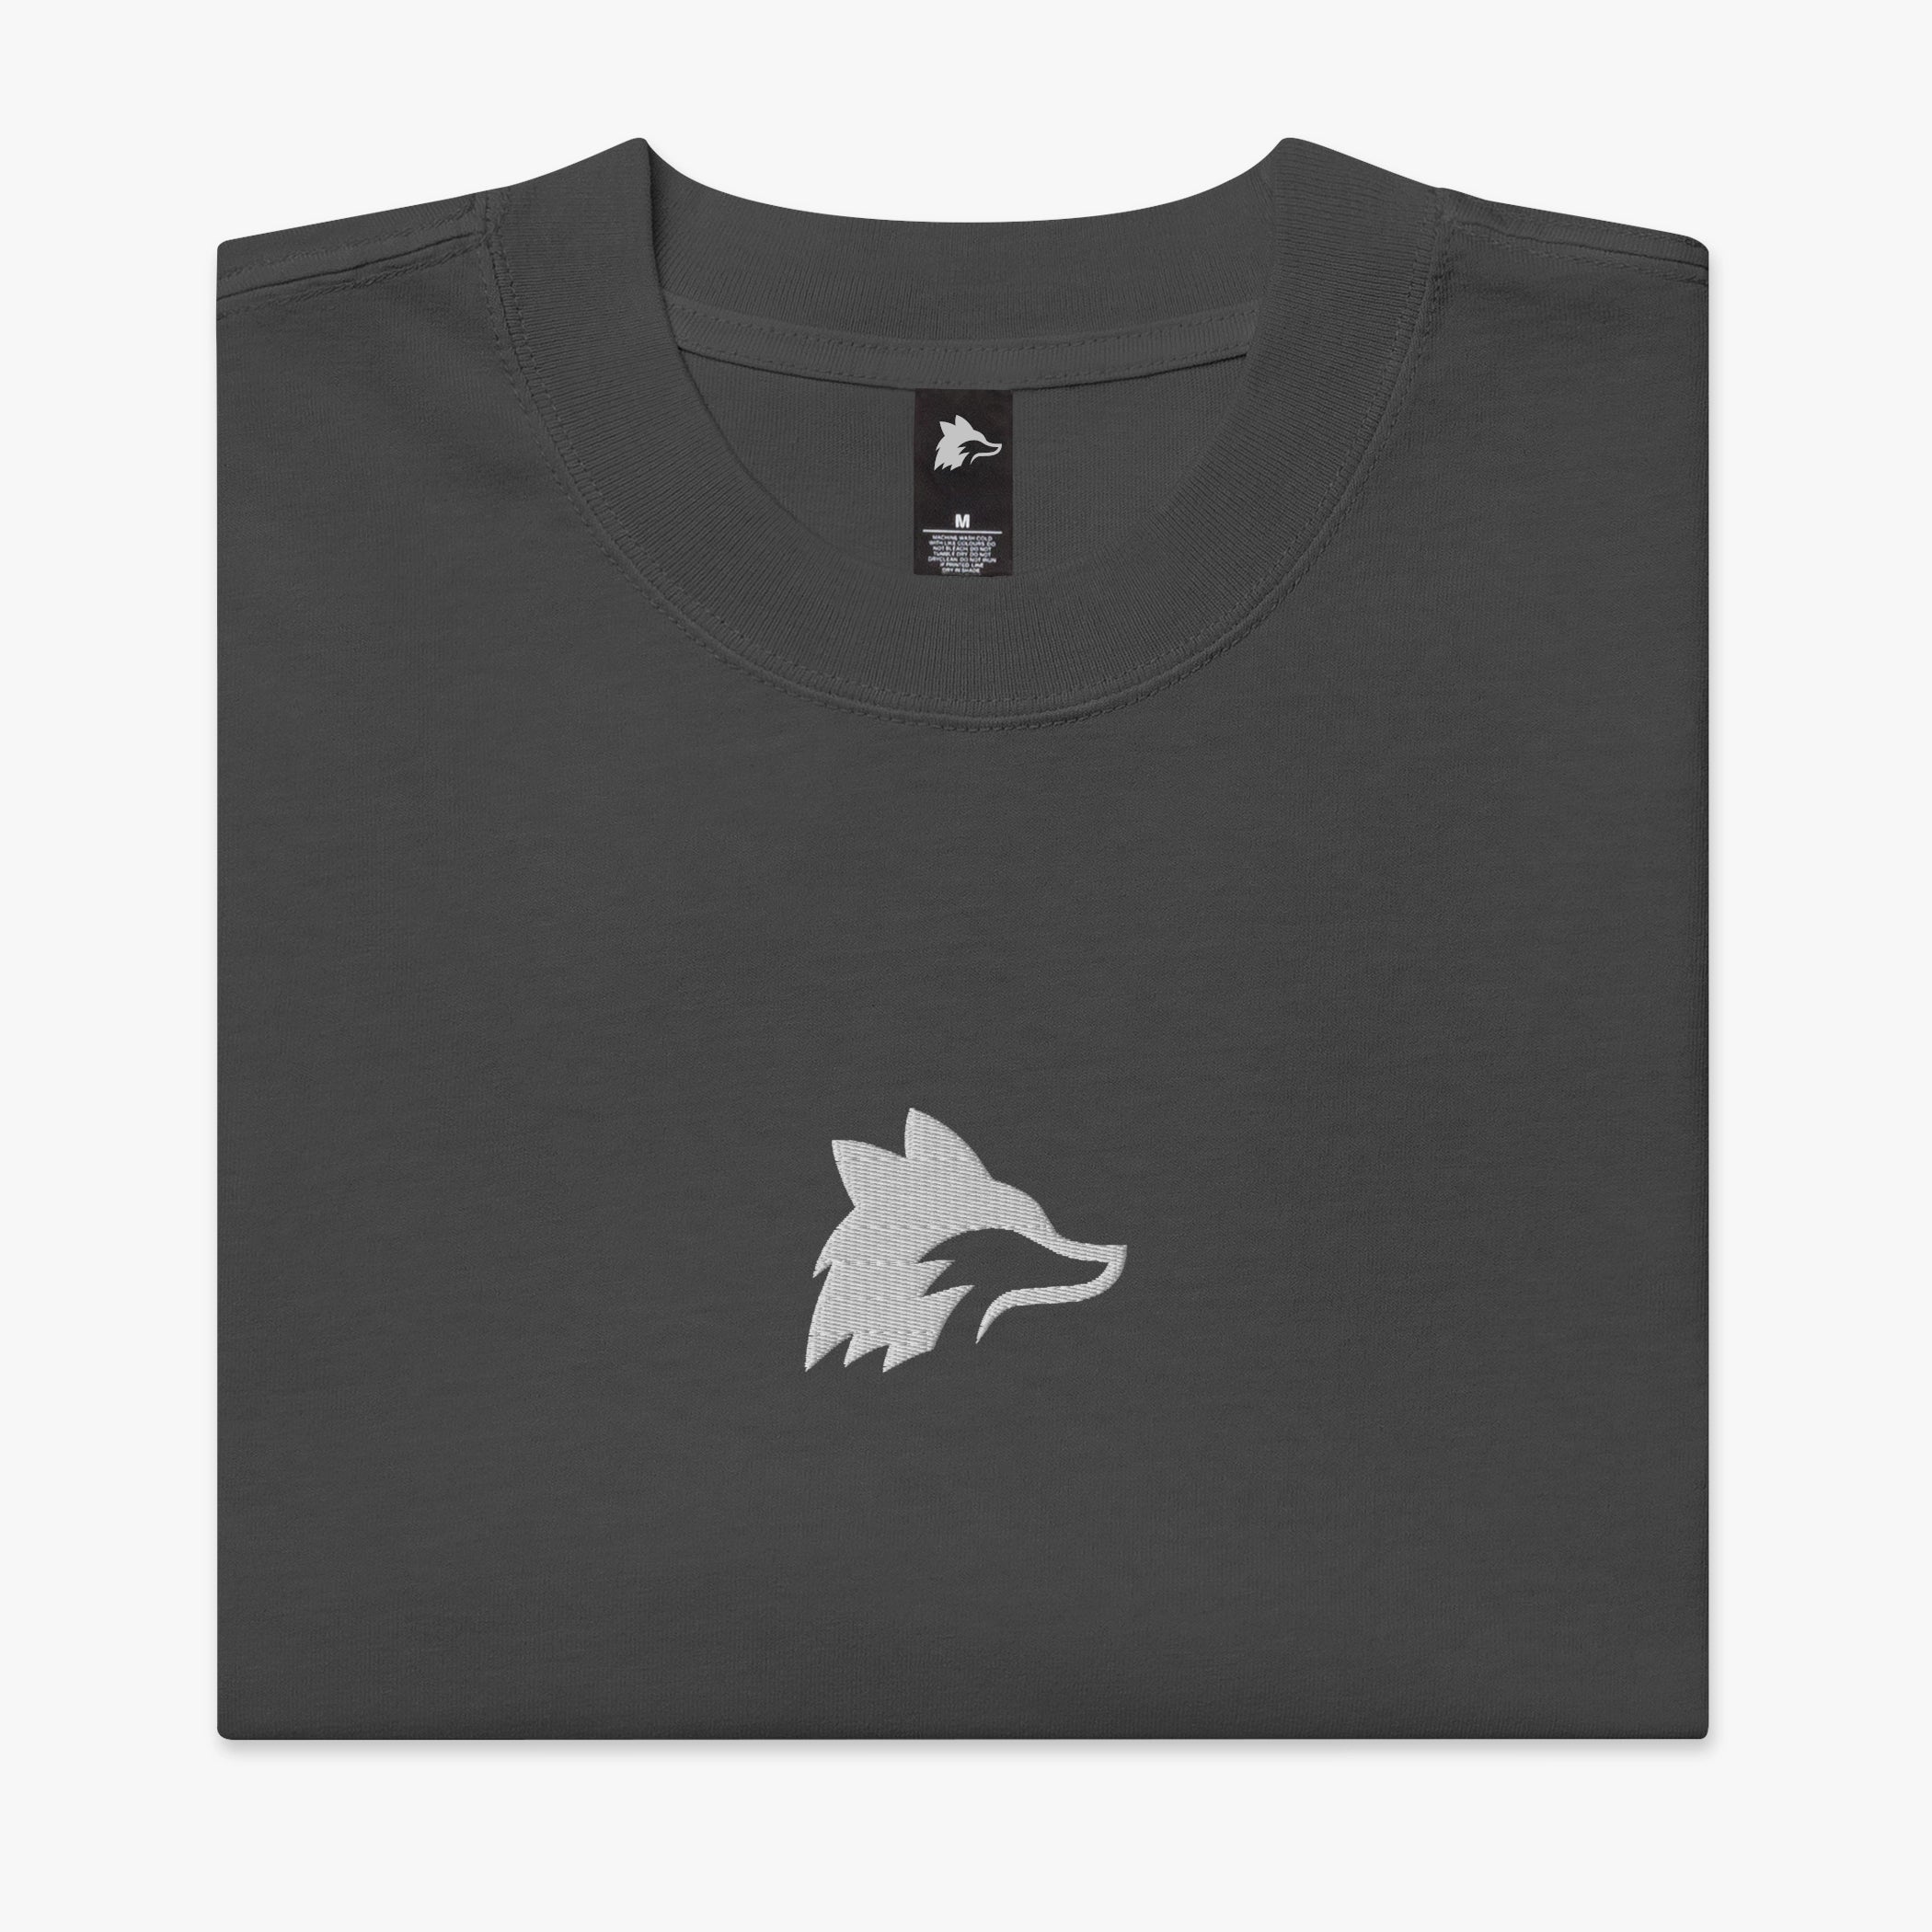 Elevate your gaming attire with the Repulse Gaming Stock 24 Tee. Crafted from 200 GSM 100% carded cotton, this tee features an embroidered design on the front for a stylish touch. Enjoy a comfortable fit with loose binding taped neck and shoulders, along with a drop-shoulder fit. The double-stitched ribbed collar adds durability, and the preshrunk fabric ensures a perfect fit while preventing shrinkage. Level up your wardrobe with this high-quality and on-trend Repulse Gaming tee.